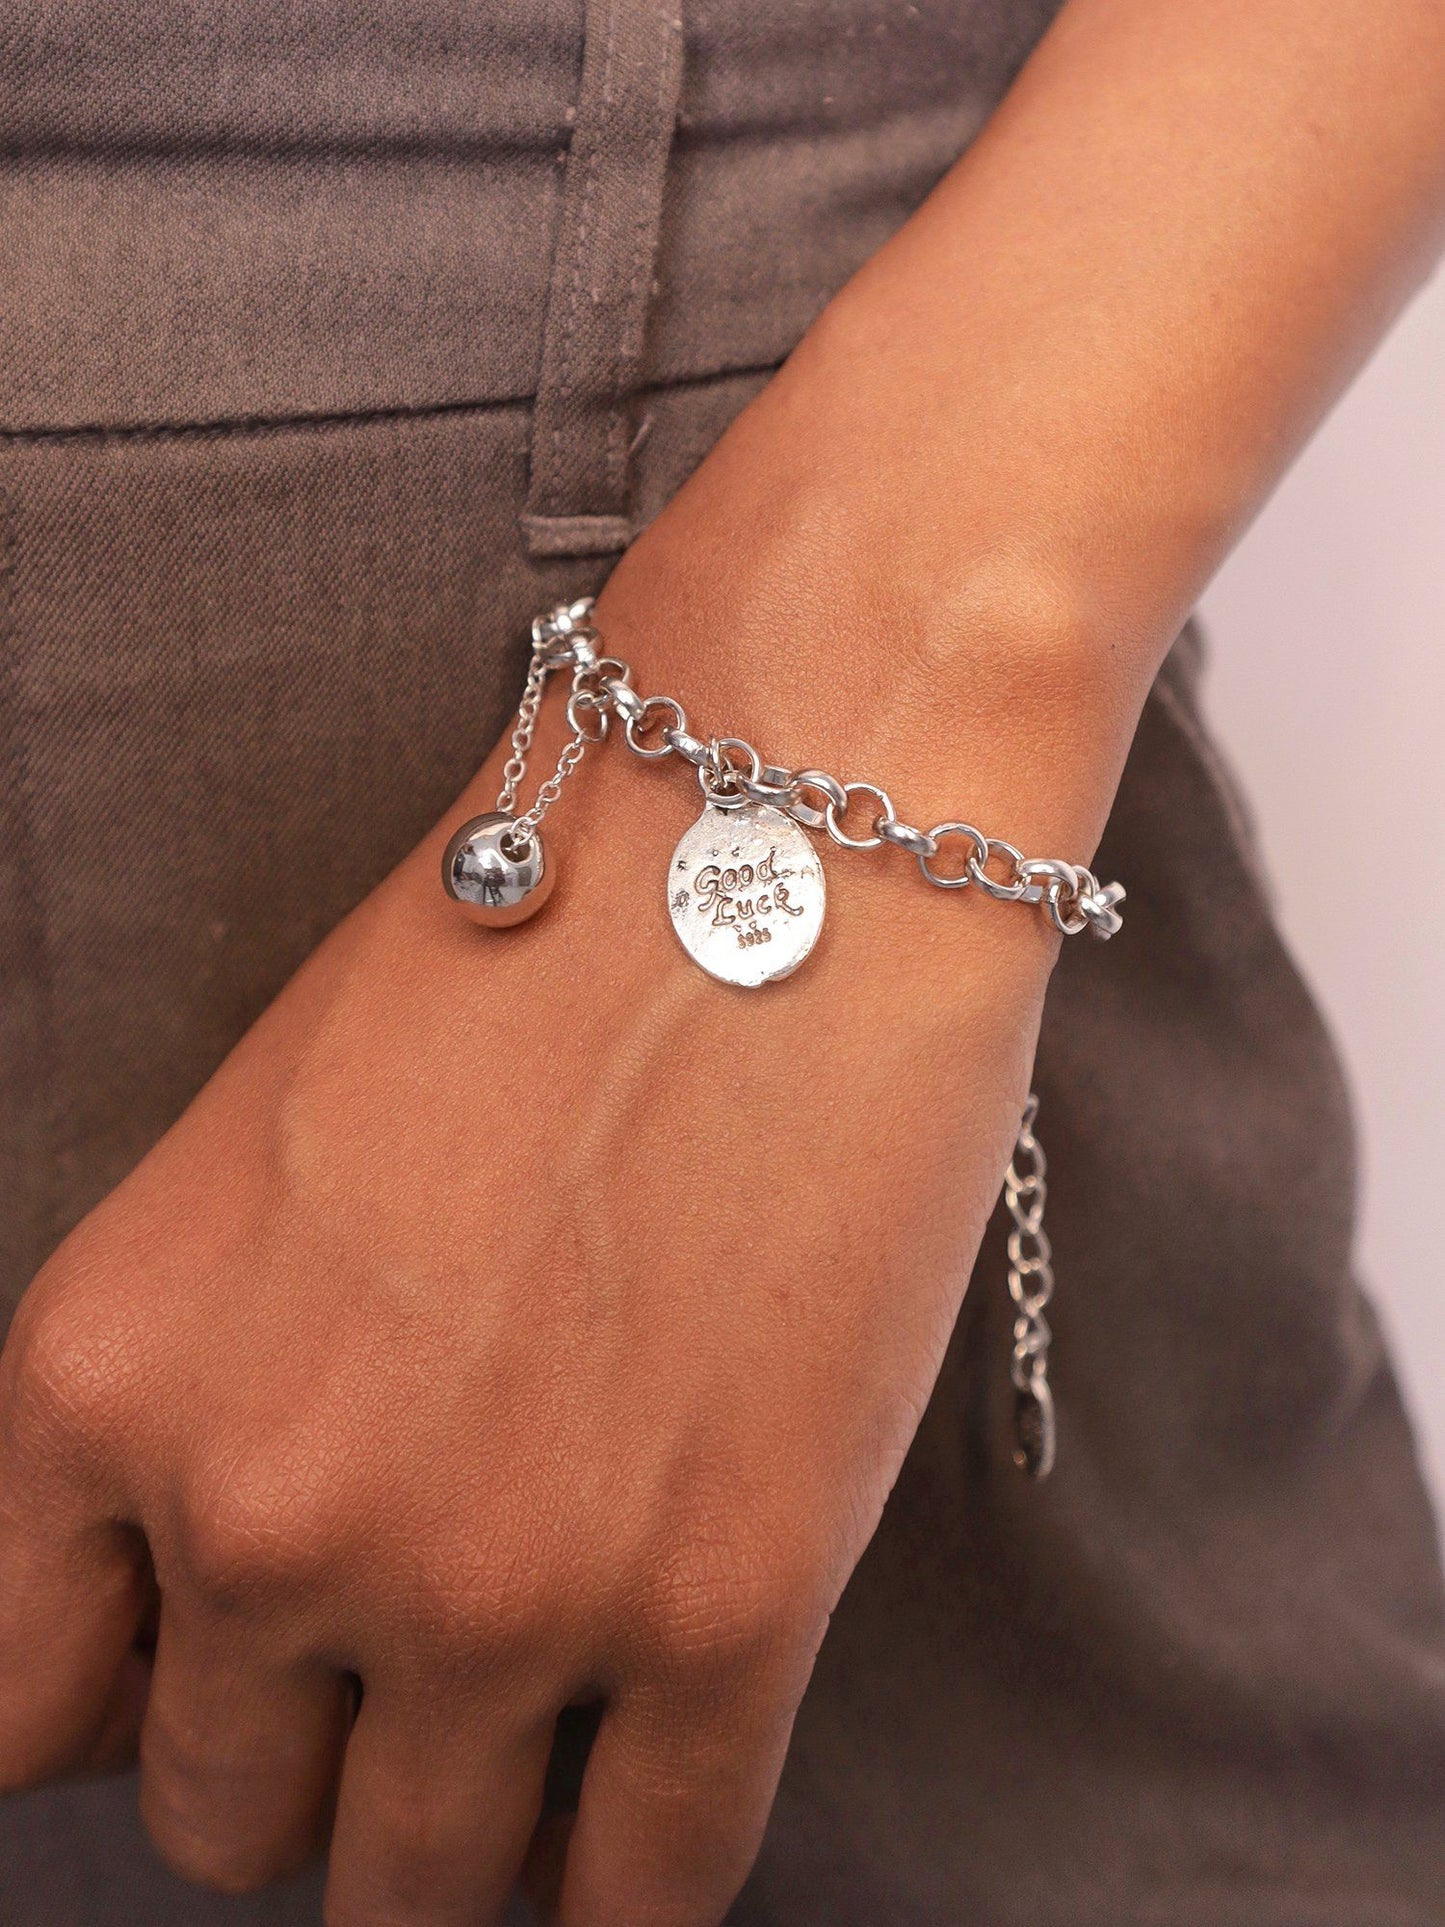 Minimal Silver Plated Link Chain Charm Bracelet